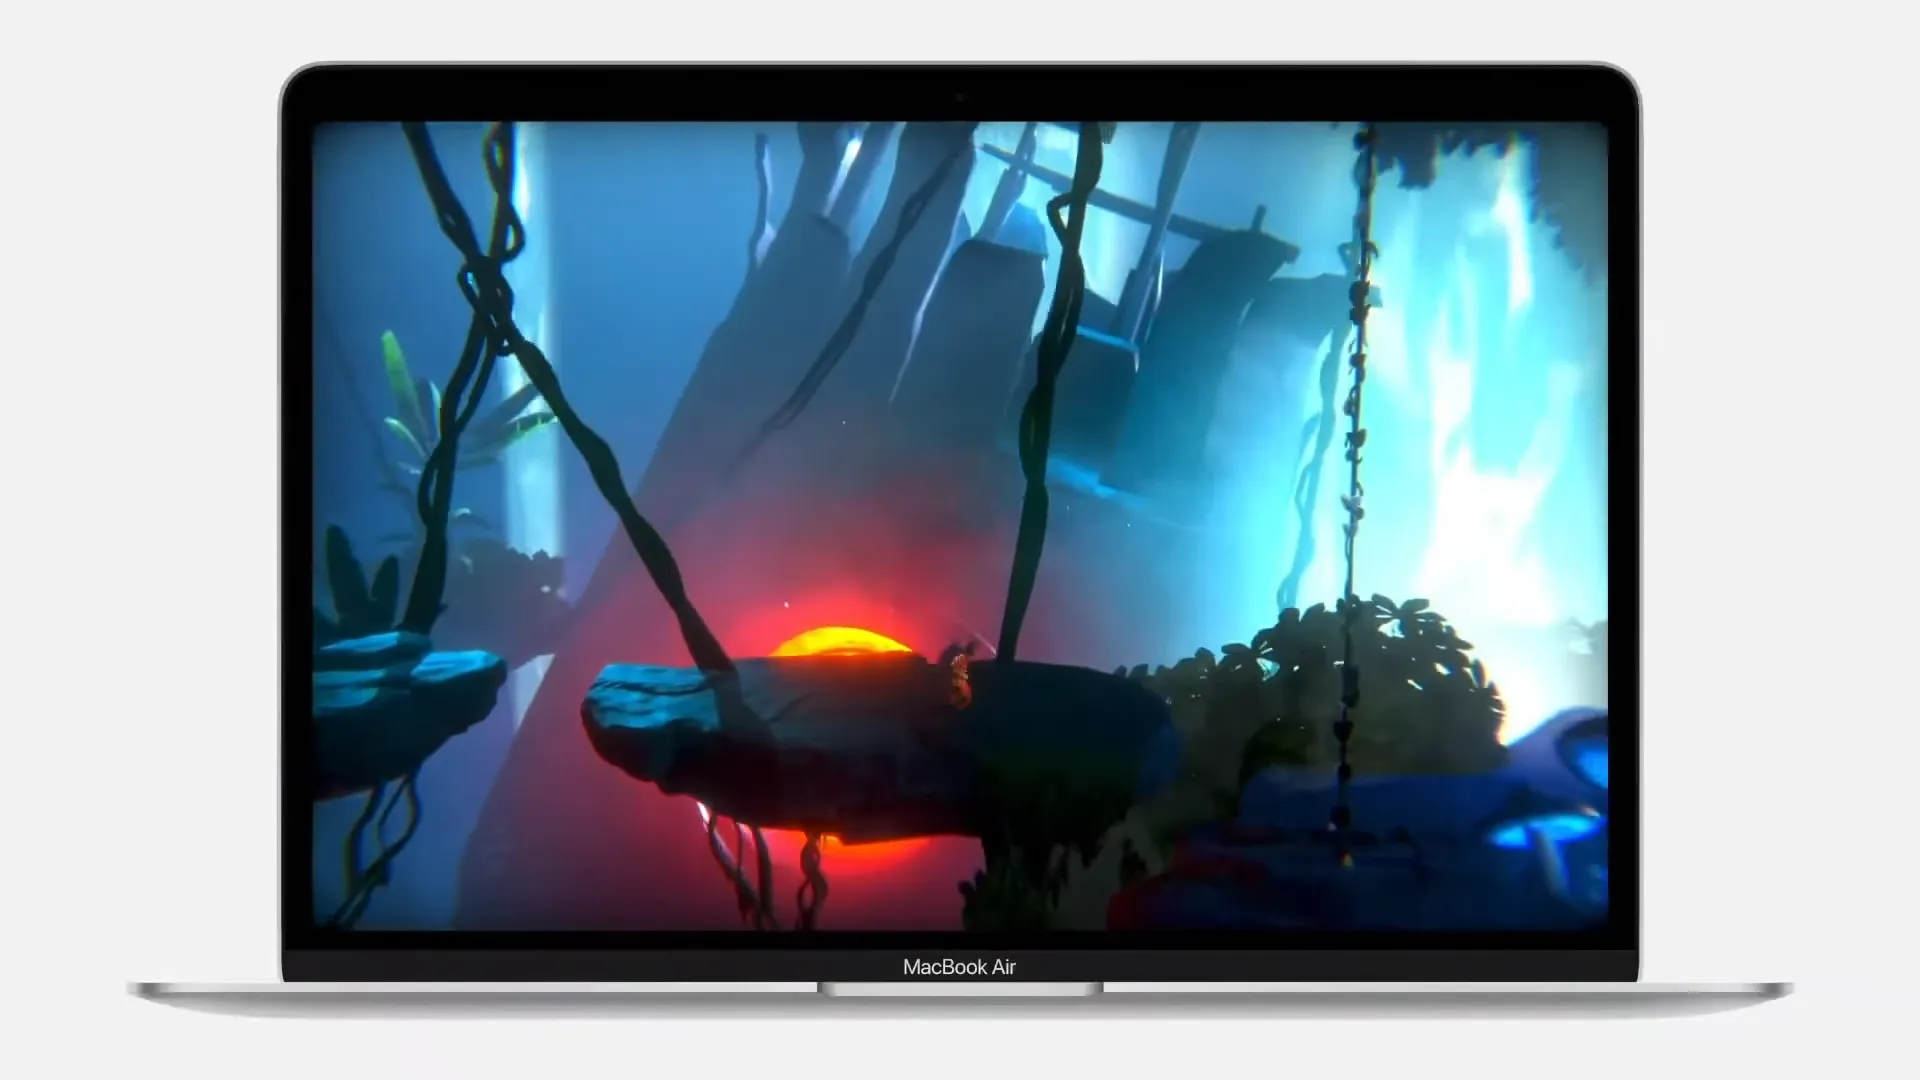 Does a MacBook Air work well for games?